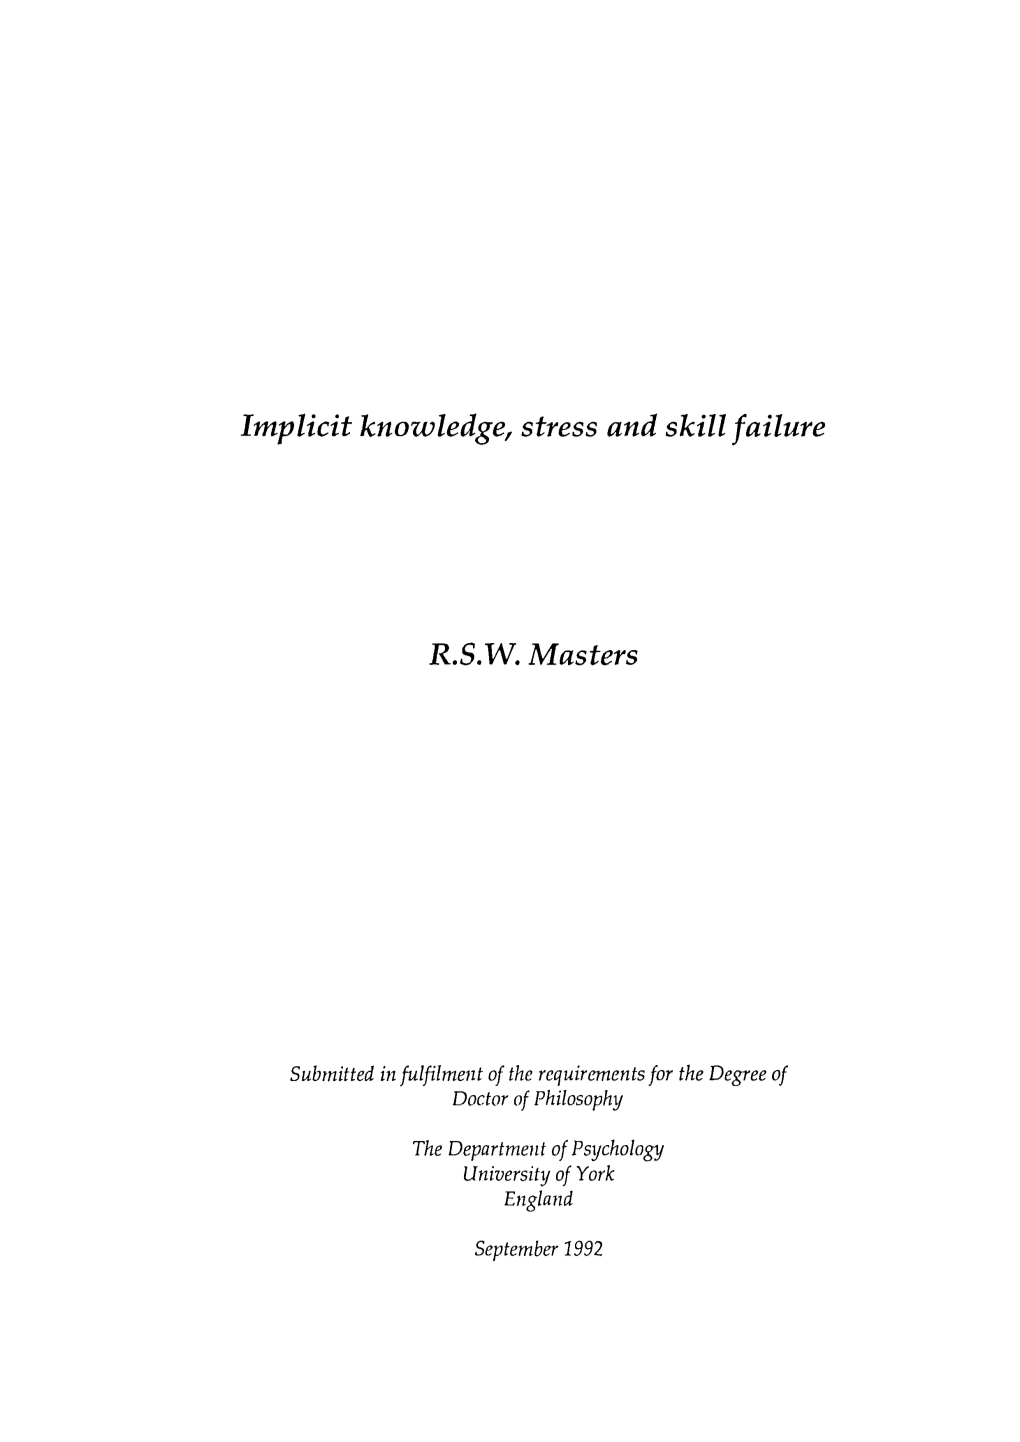 Implicit Knowledge, Stress and Skill Failure R.S.W. Masters